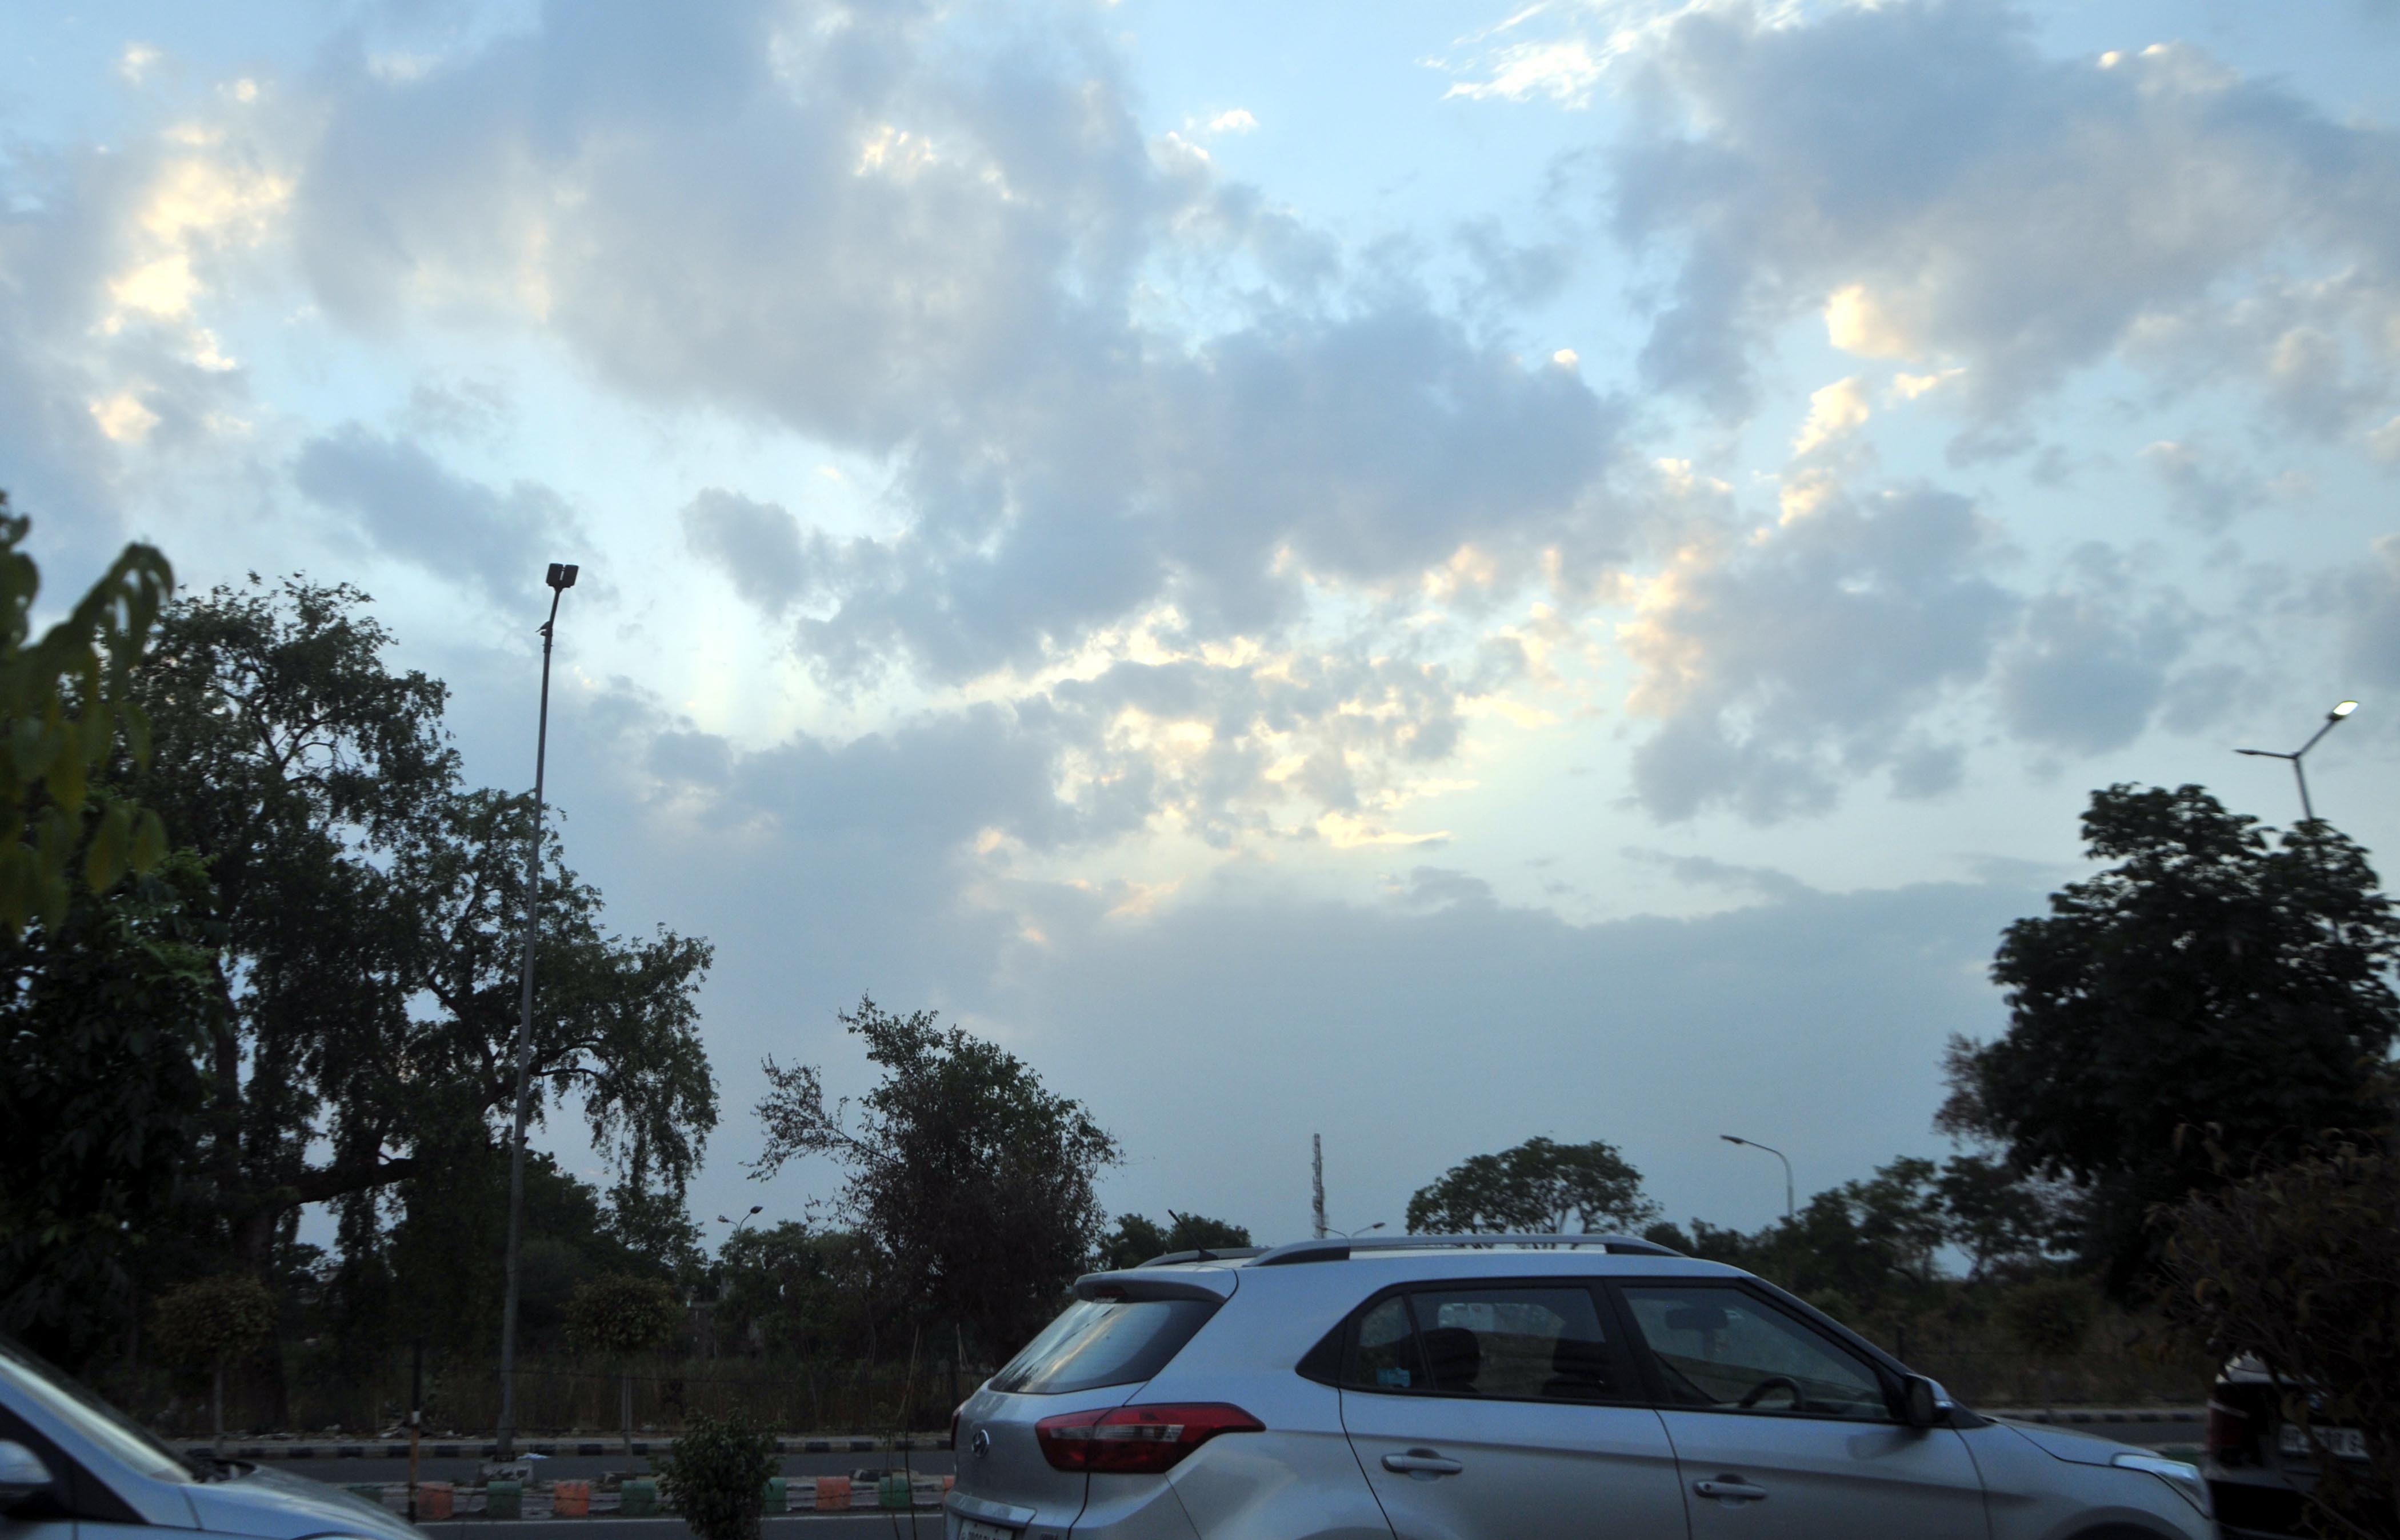 Clouds bring respite from scorching heat